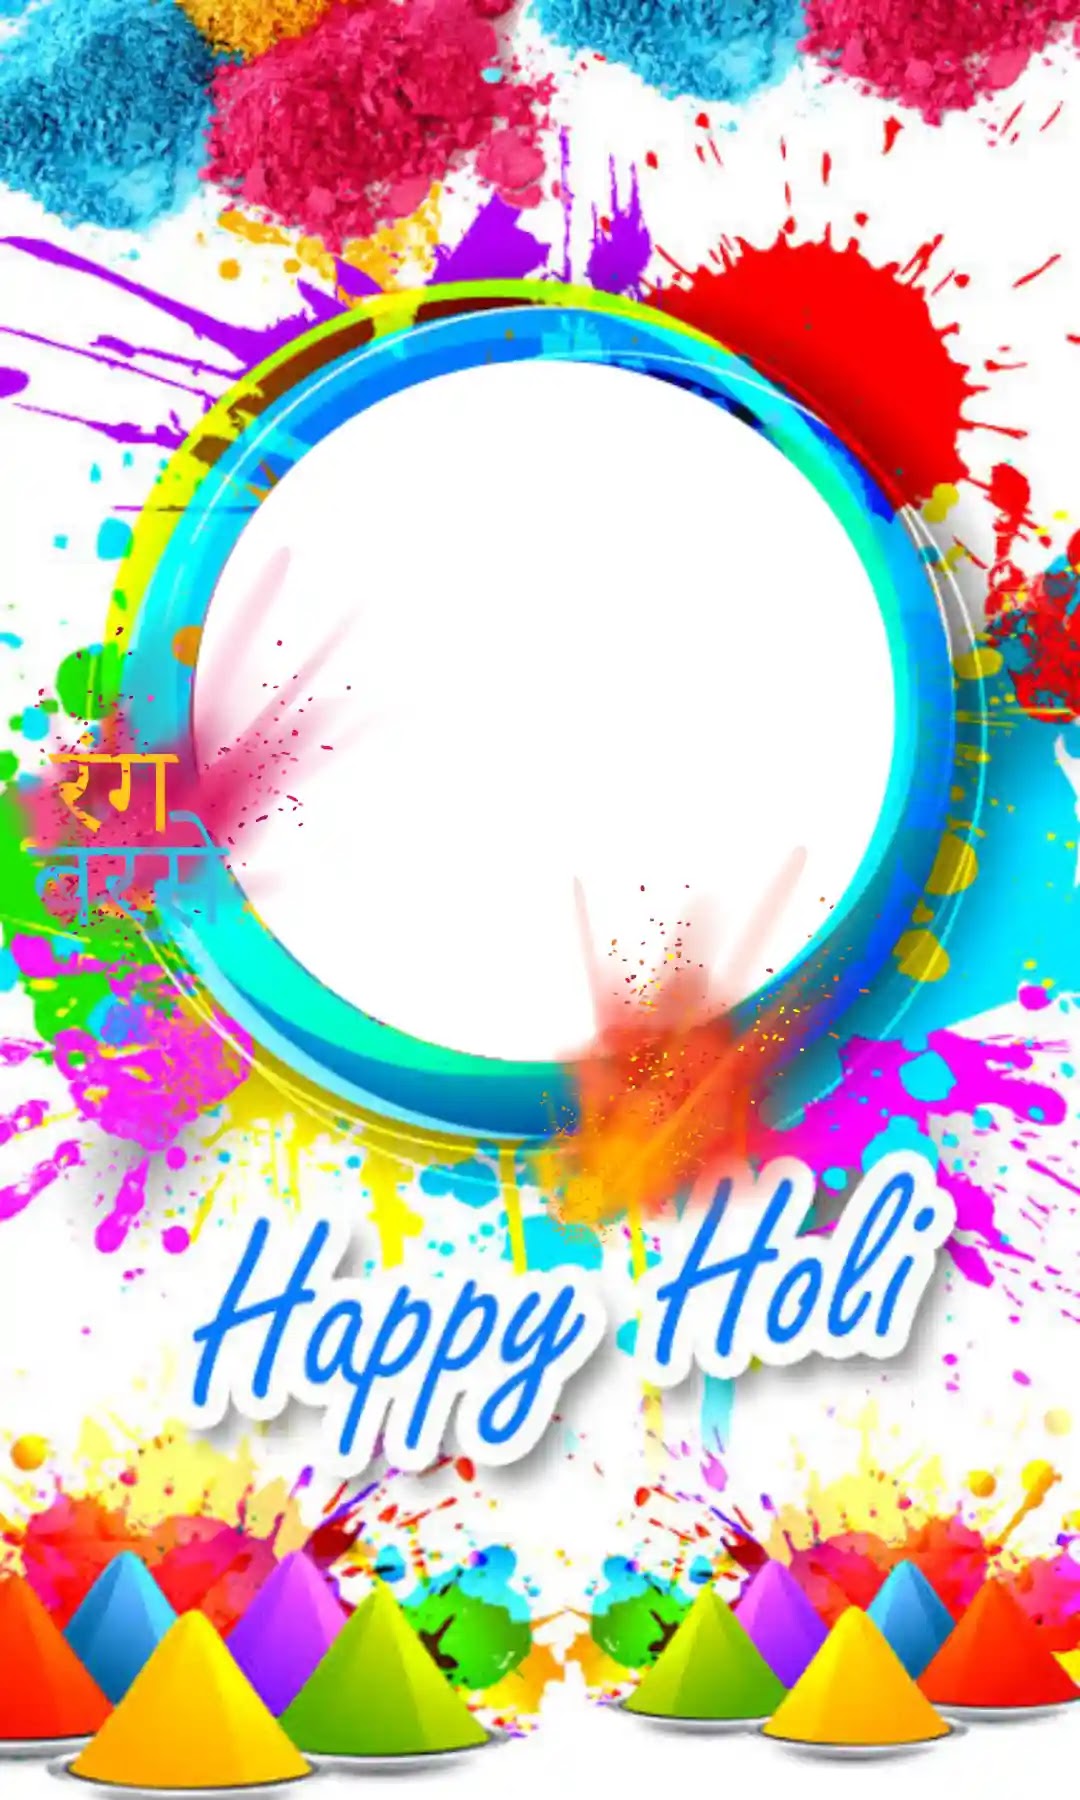 Happy holy banner making template